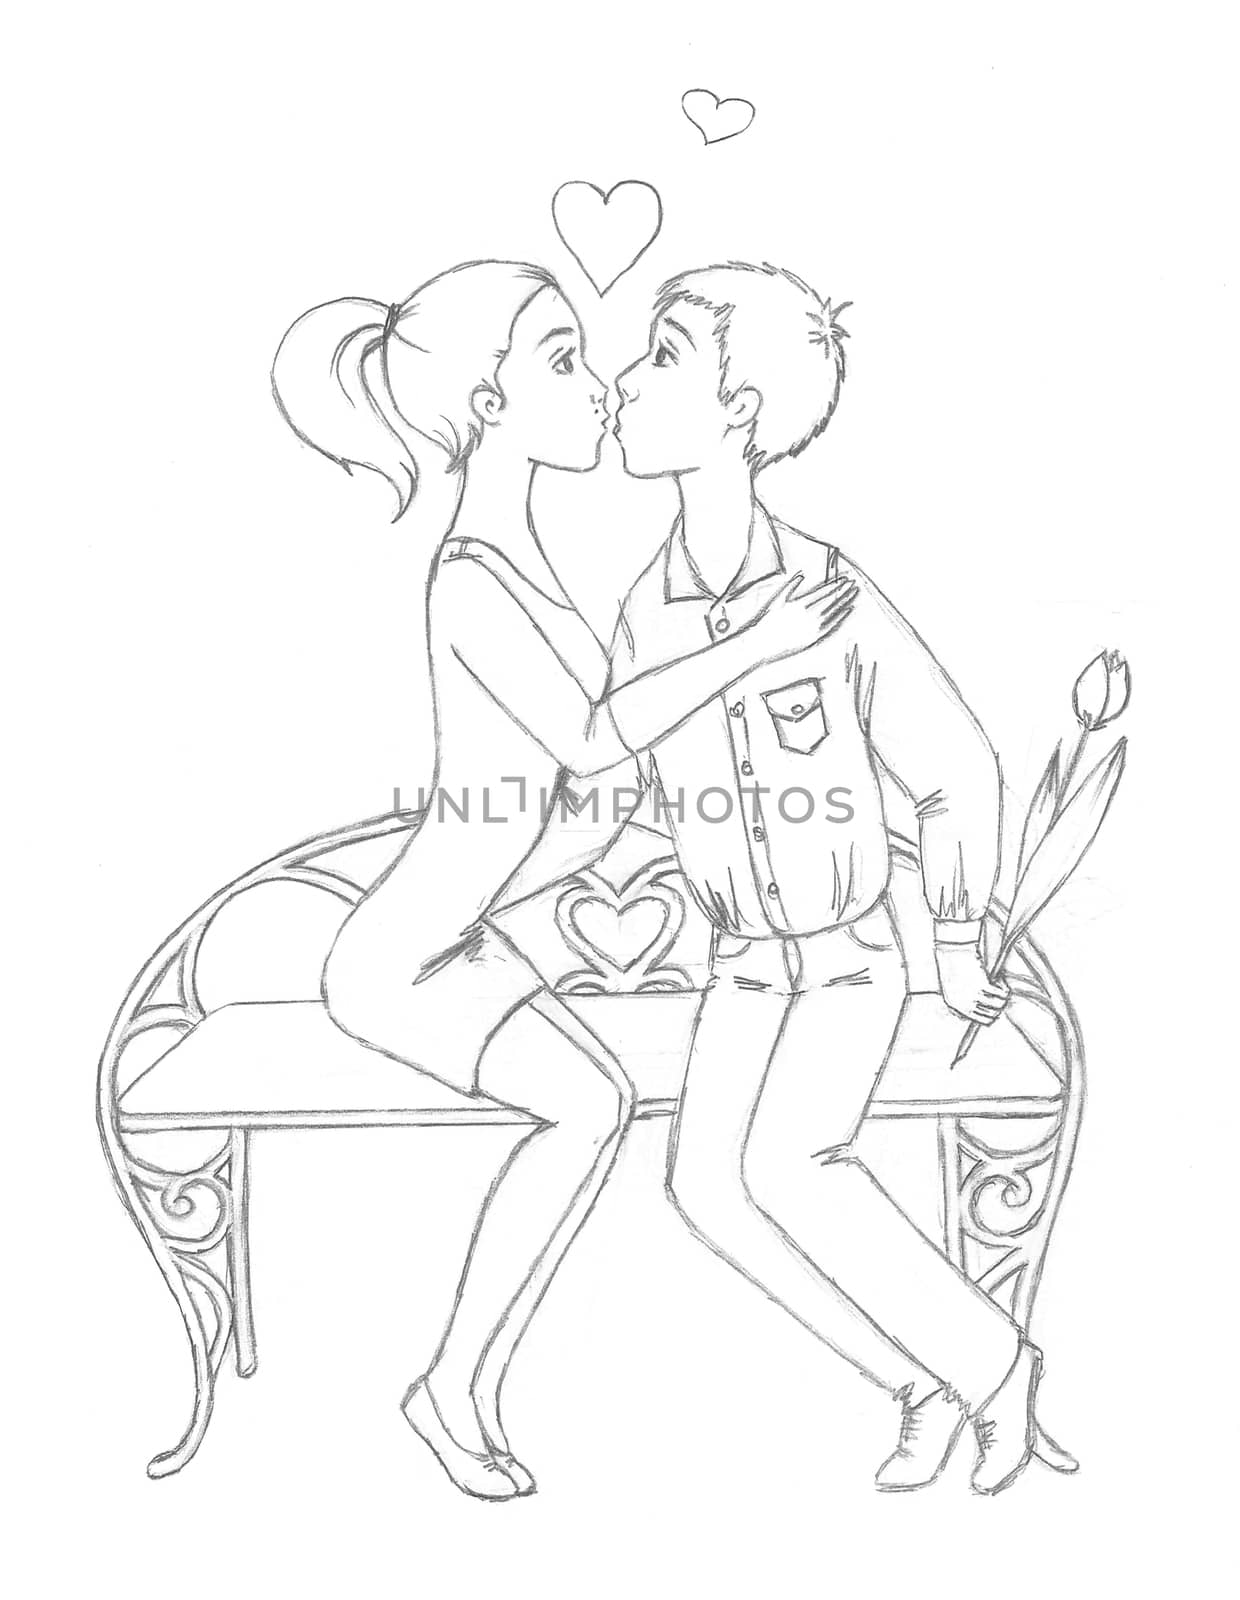 Loving couple kissing on a bench. Scanned sketch in pencil